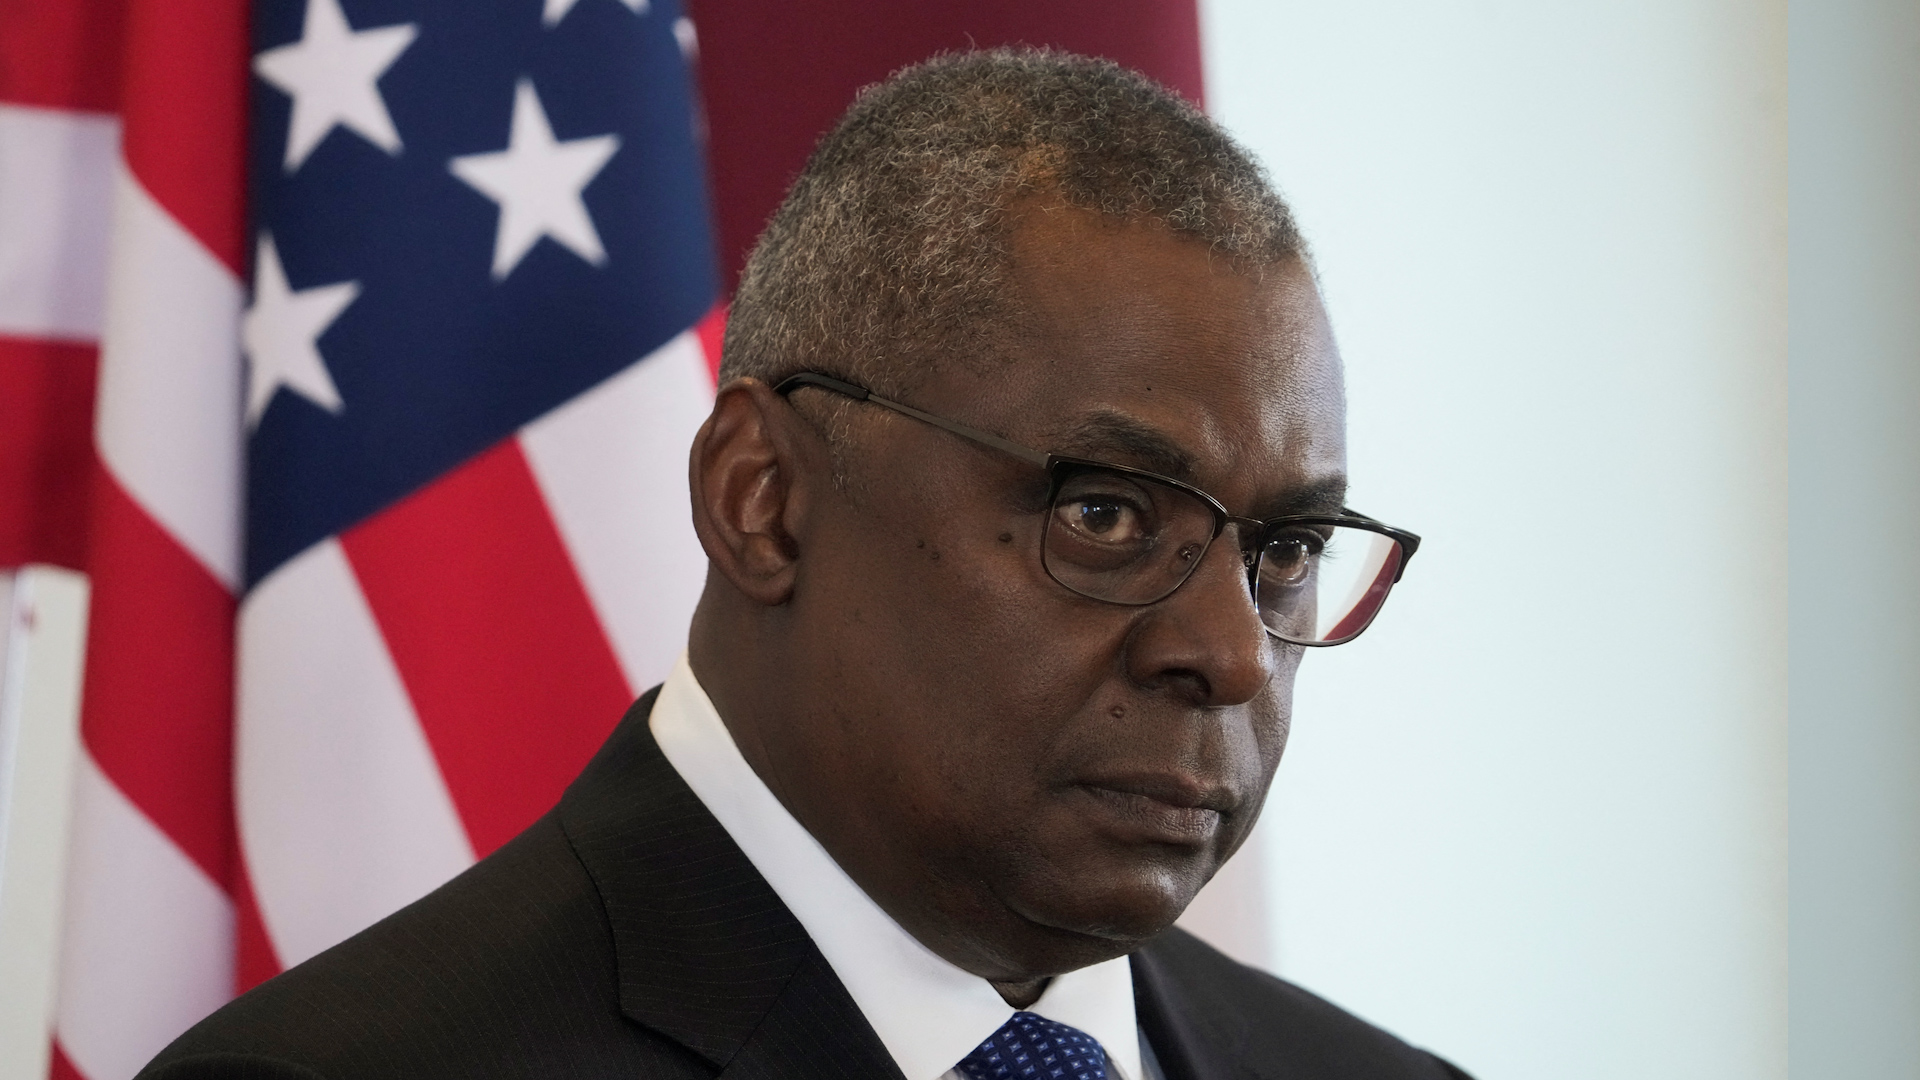 Secretary of Defense Lloyd Austin was discharged from the hospital after non-surgical care, with doctors expecting a full recovery.